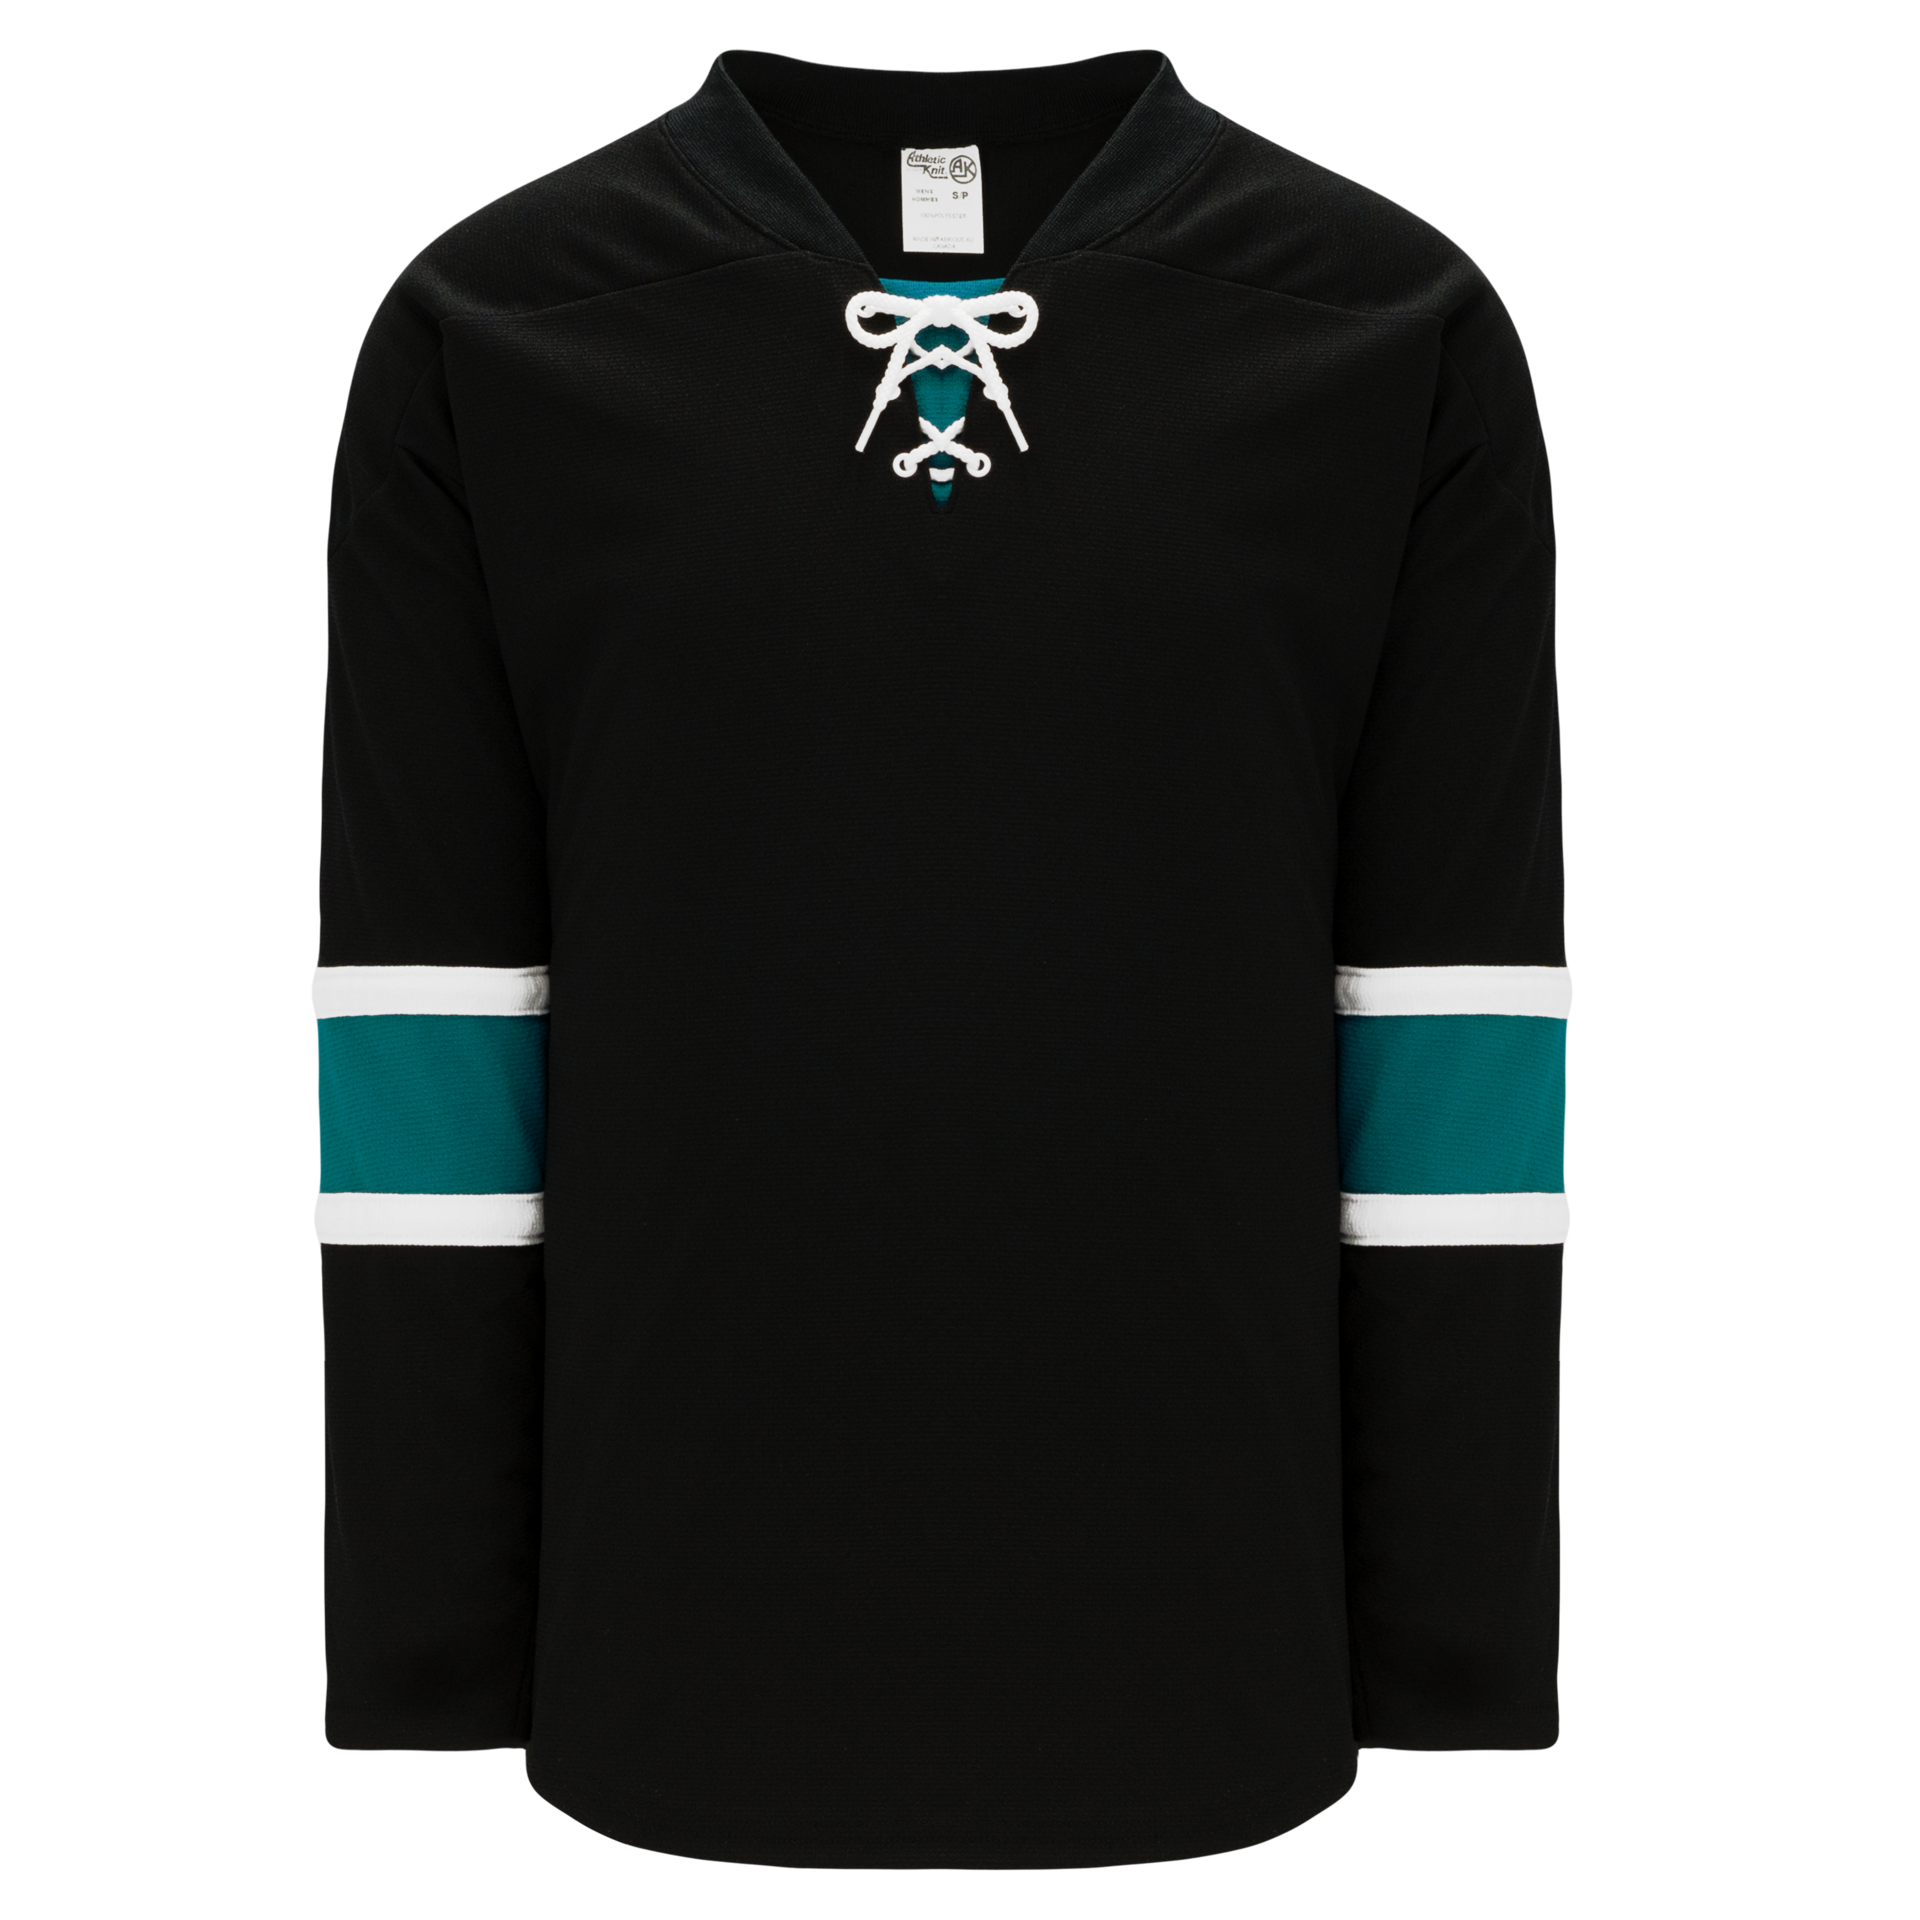 Hockey Fights Cancer San Jose Sharks Purple 255J Adidas NHL Authentic -  Hockey Jersey Outlet